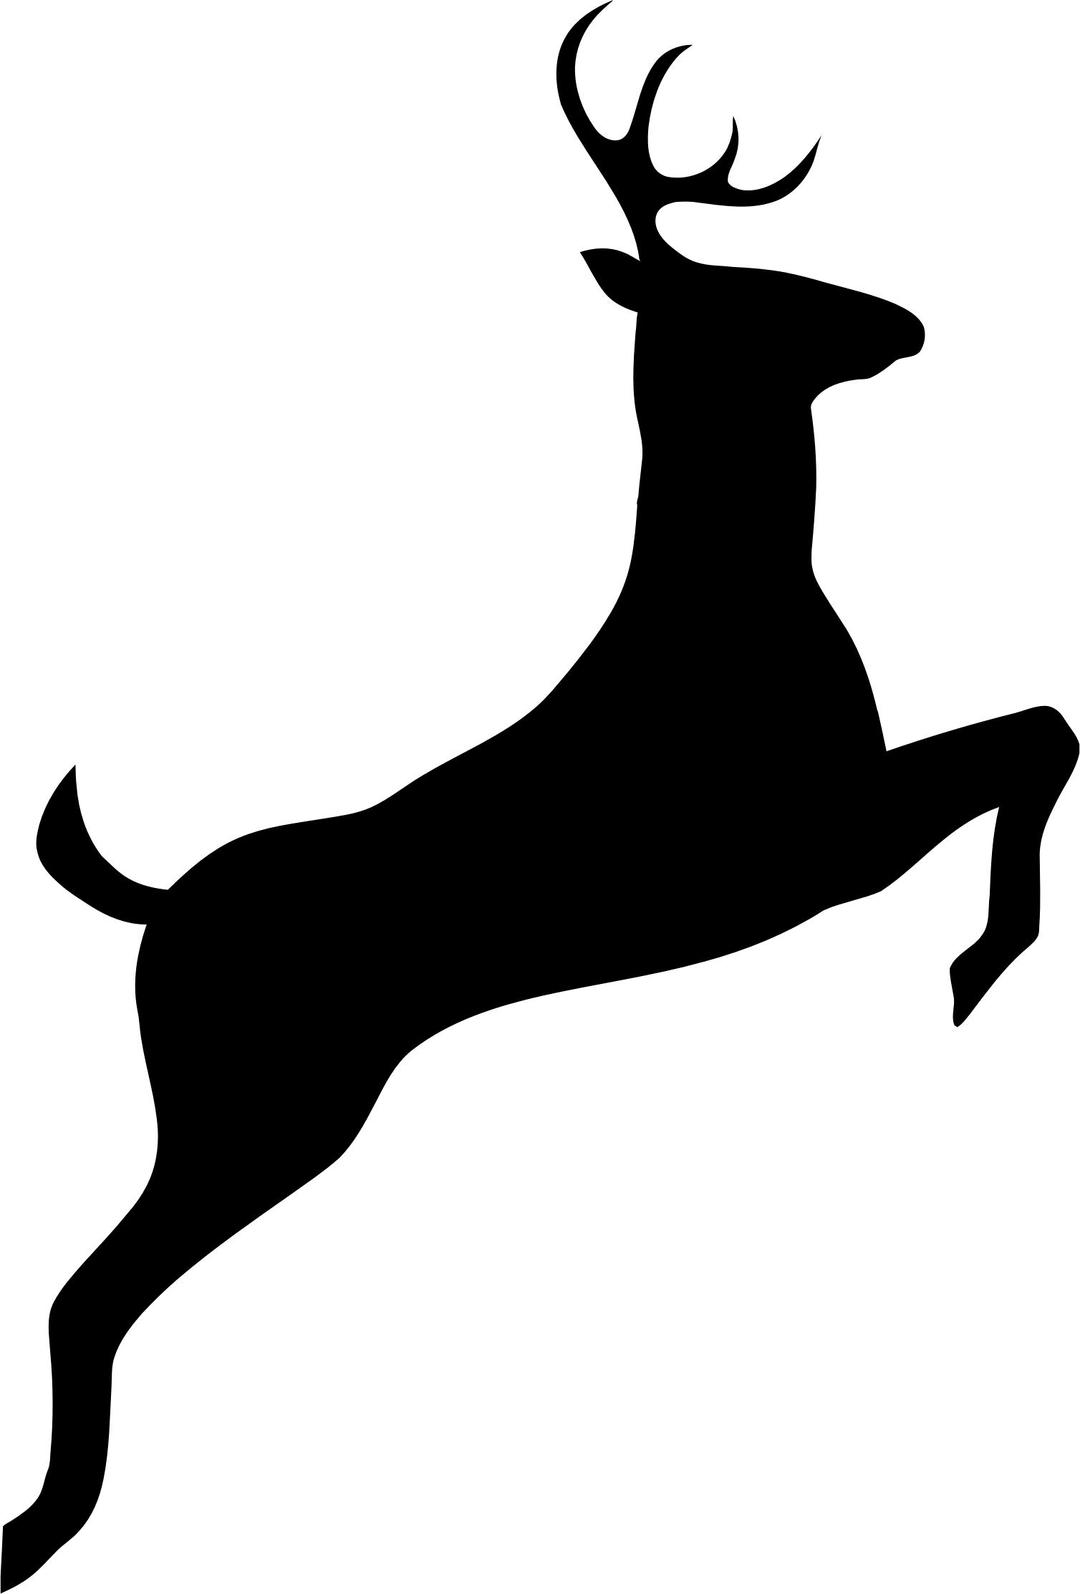 Leaping Deer Silhouette png transparent